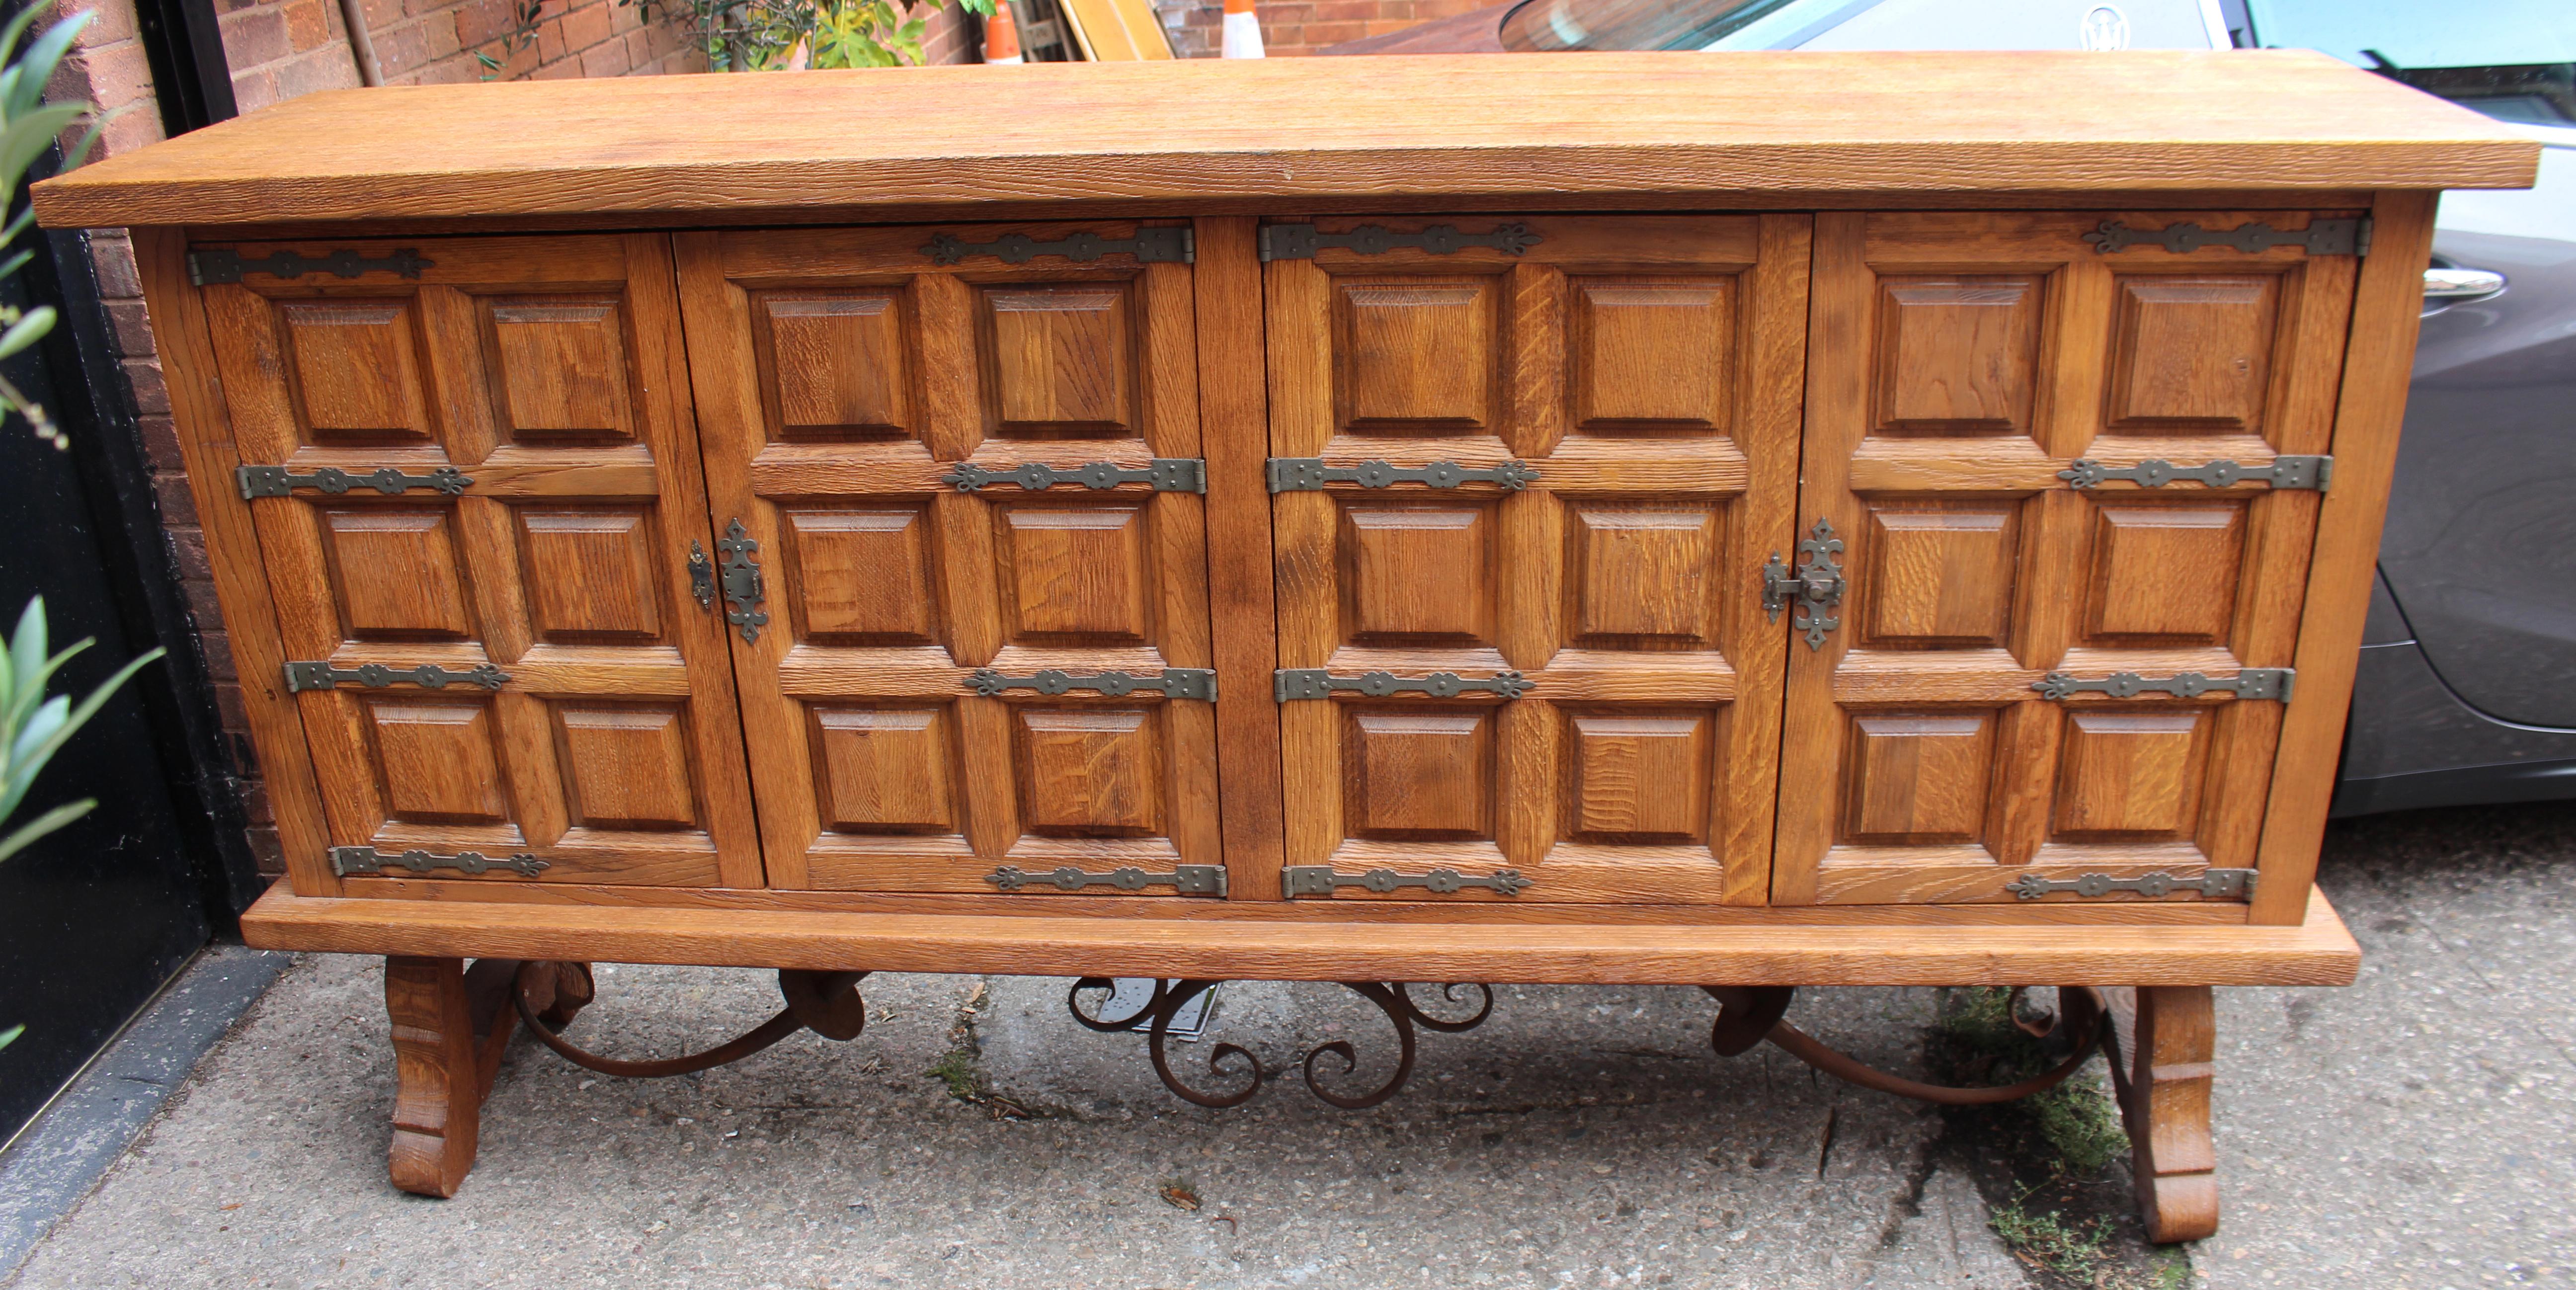 Heavy Spanish oak side cabinet with geometric panel doors


Measures: Width: 220 cm. 

Depth: 53 cm. 

Height: 120 cm

Offered for sale a late 20th century handmade Spanish oak cabinet.

Impressive size and very heavy.

Offered in good